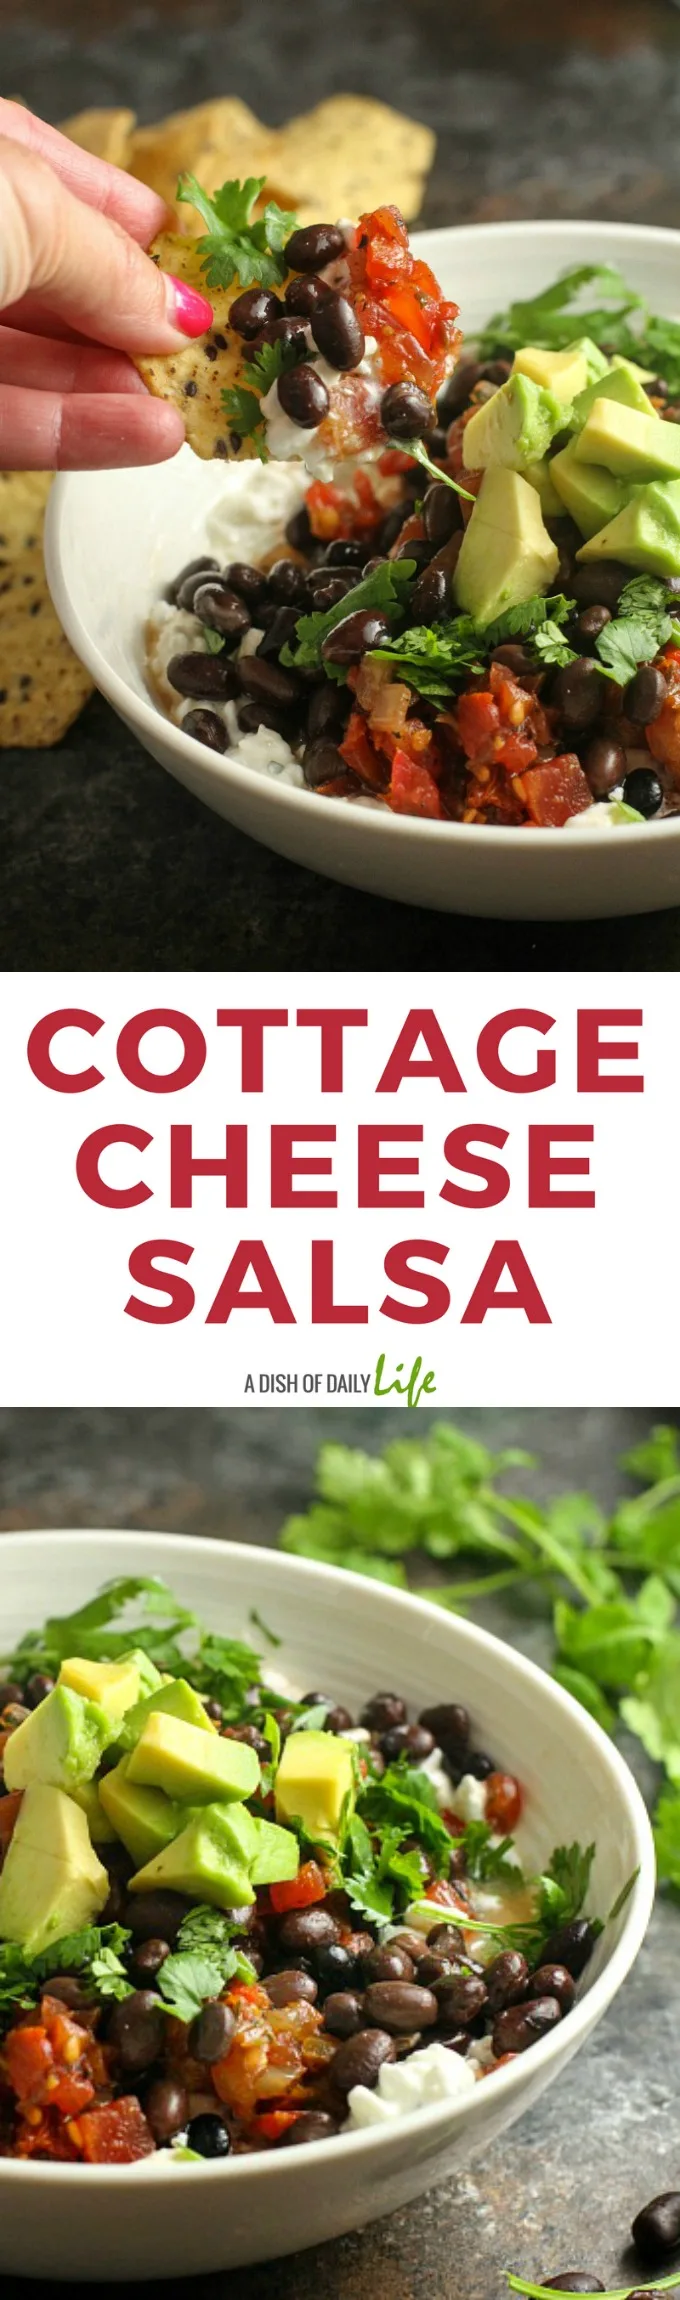 Cottage Cheese Salsa...this easy and delicious protein packed snack is the perfect post workout snack or healthy lunch! Serve it with multigrain chips or crackers, or eat it with a spoon!